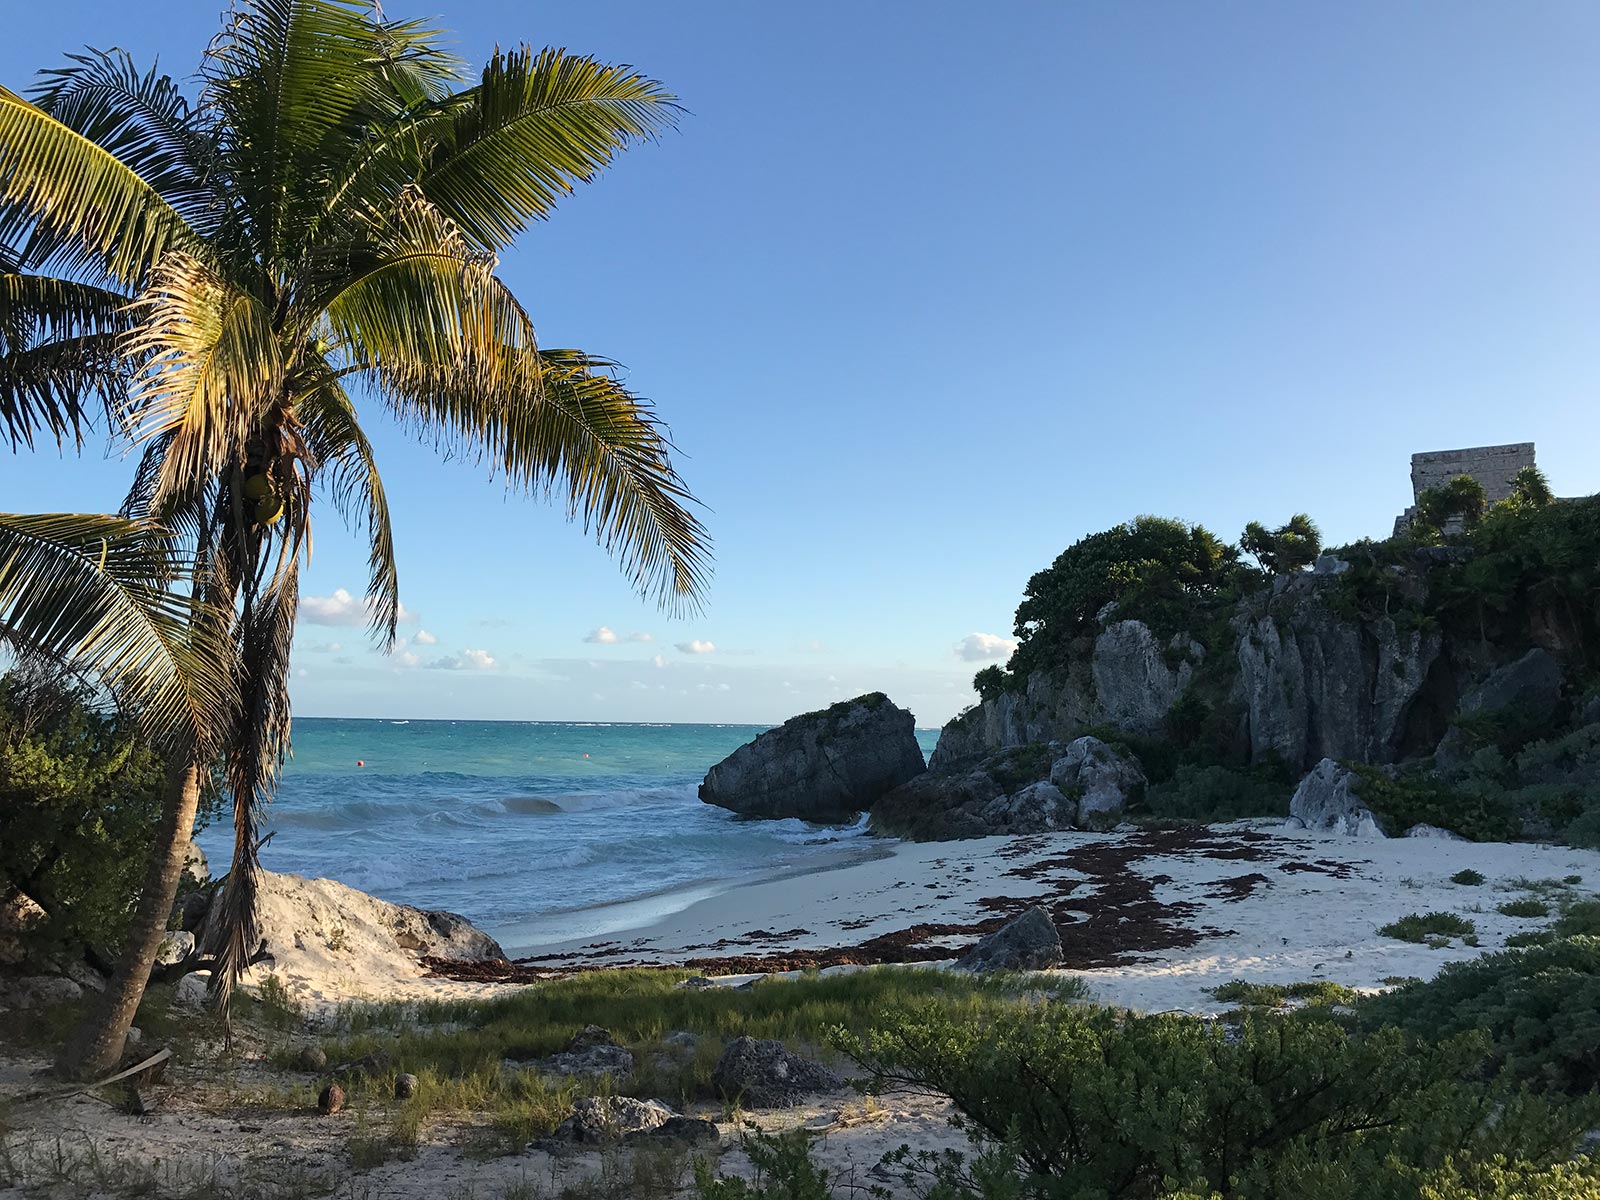 Beach with rock formations and a coconut tree in Tulum, Mexico. Chichén Itzá and the Yucatán coast